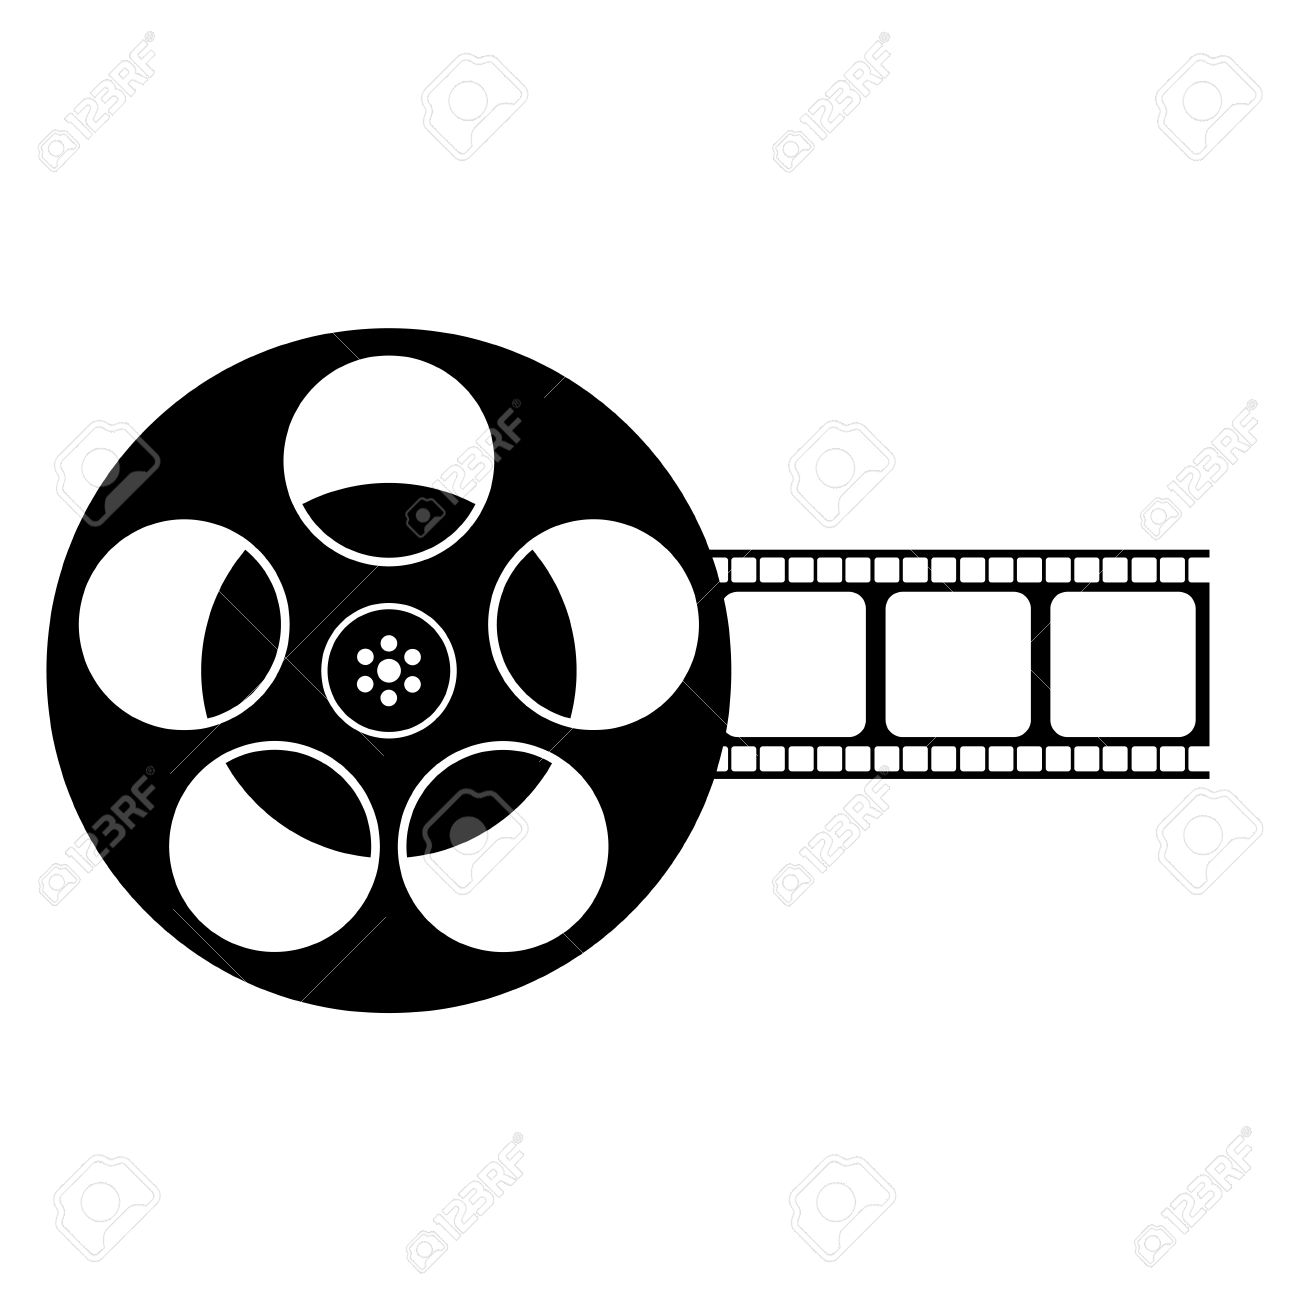 Set of simple film icons Royalty Free Vector Image